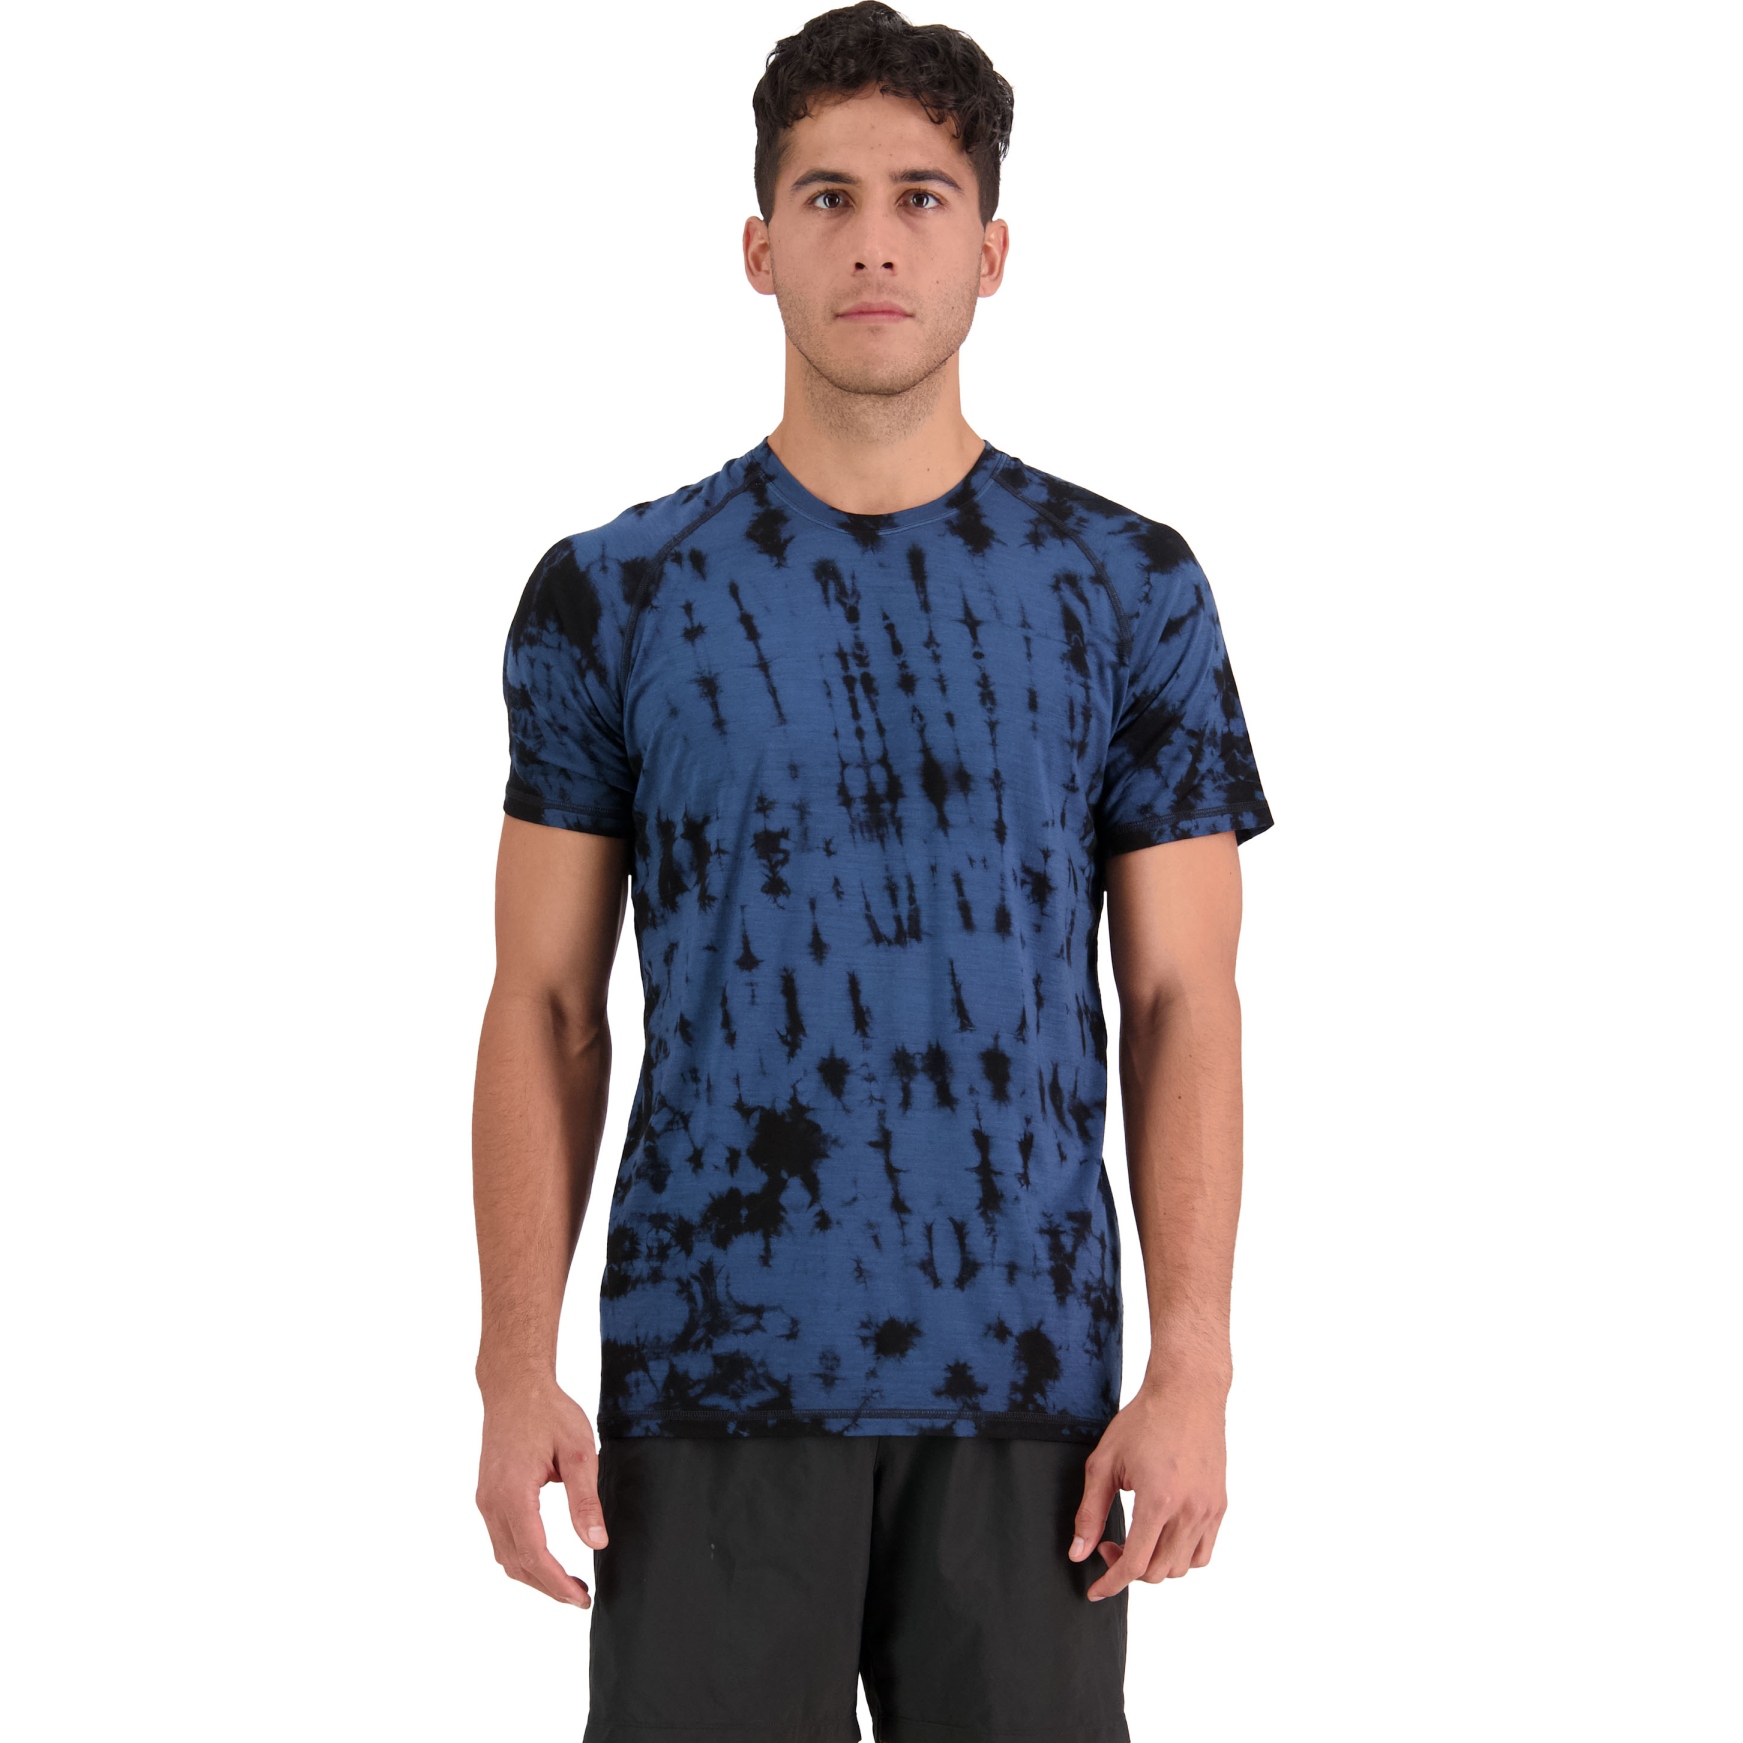 Picture of Mons Royale Temple Merino Air-Con T-Shirt Men - ice night tie dye